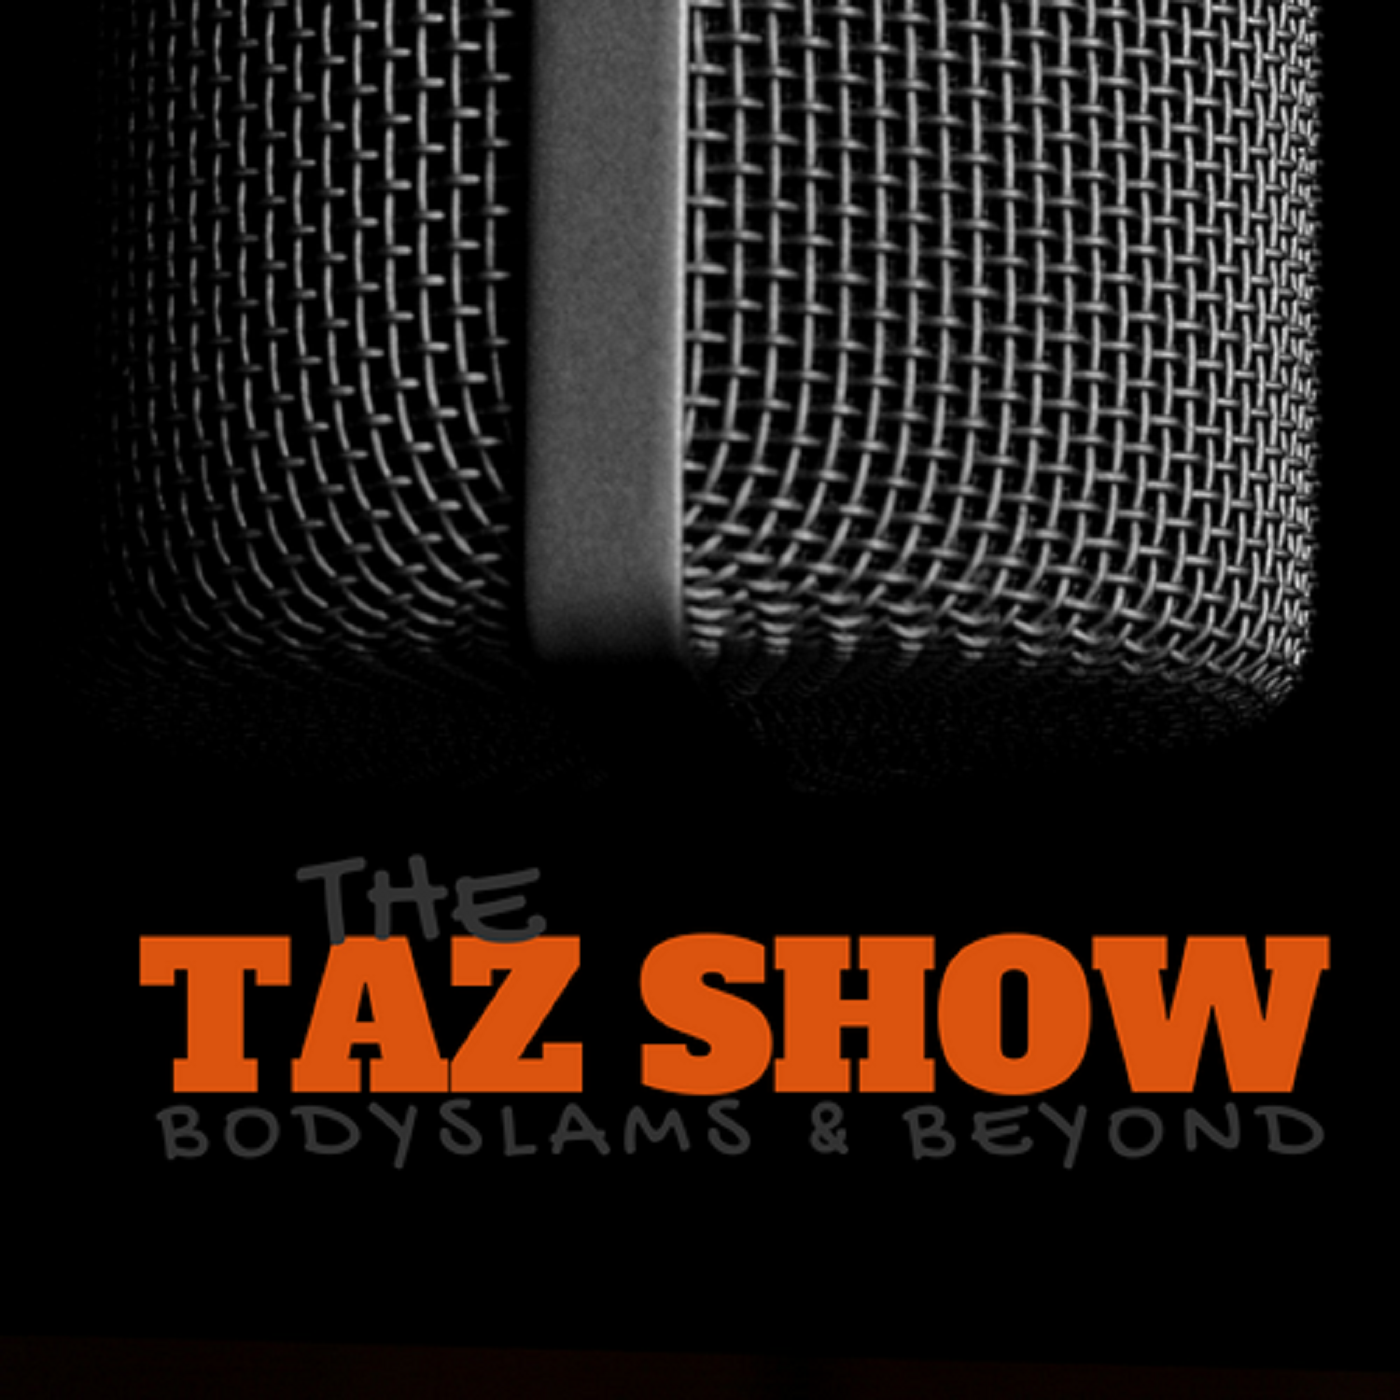 The debut episode of The Taz Show!